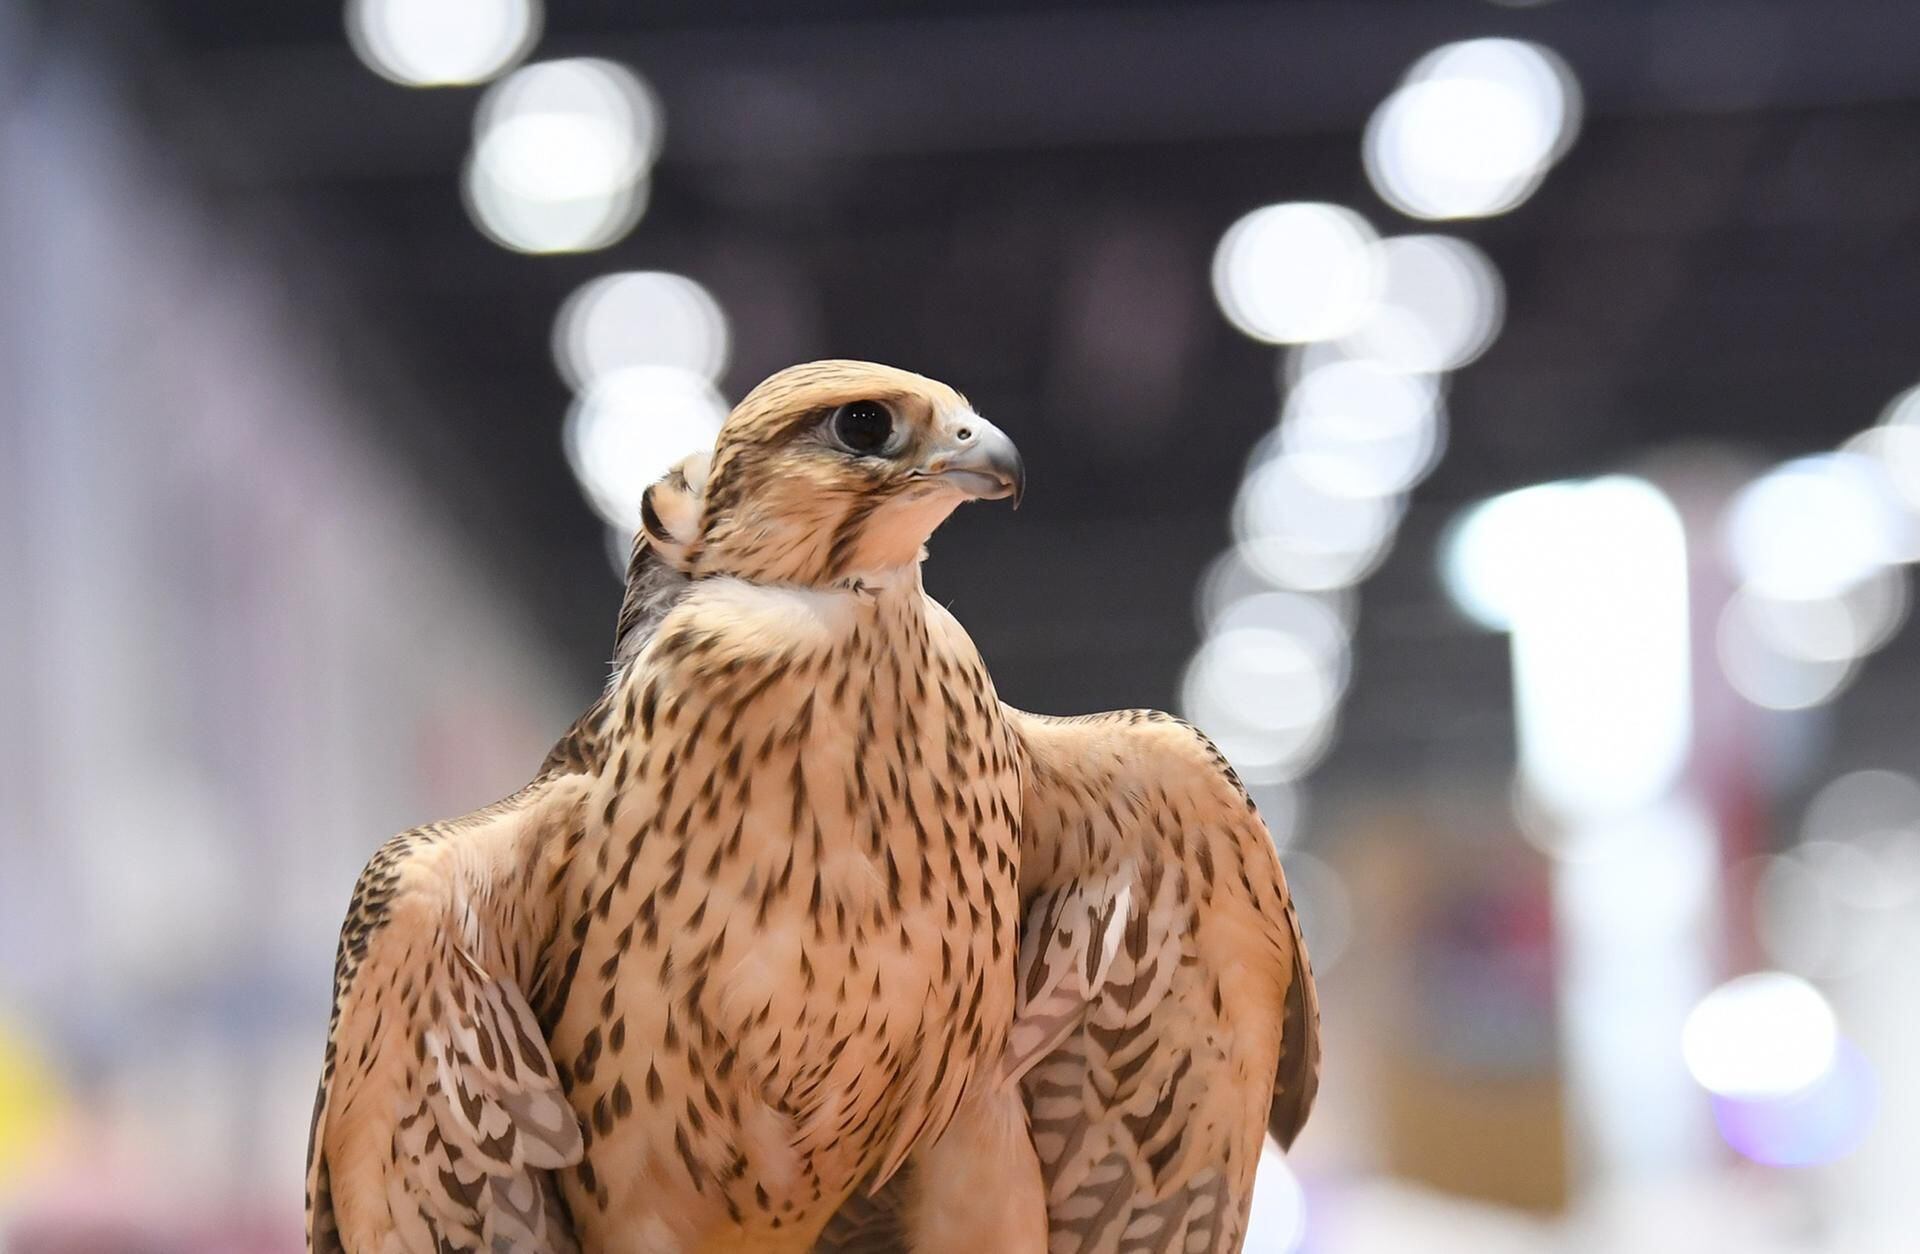 Abu Dhabi falcon competition judge reveals what makes the perfect bird